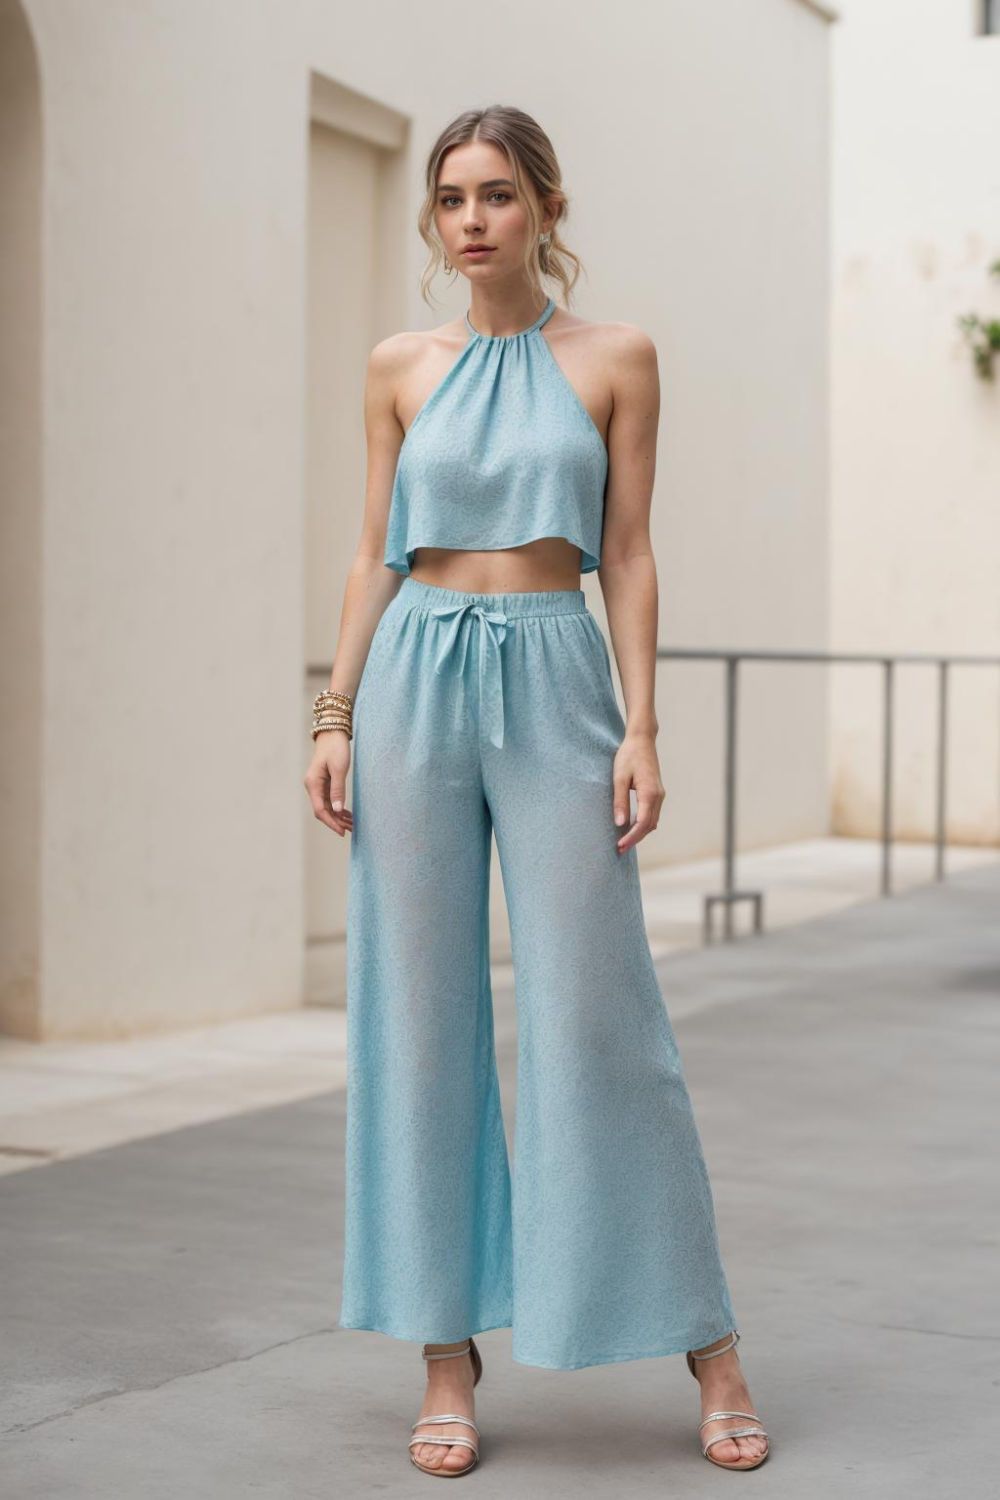 elegant palazzo pants with a halter top